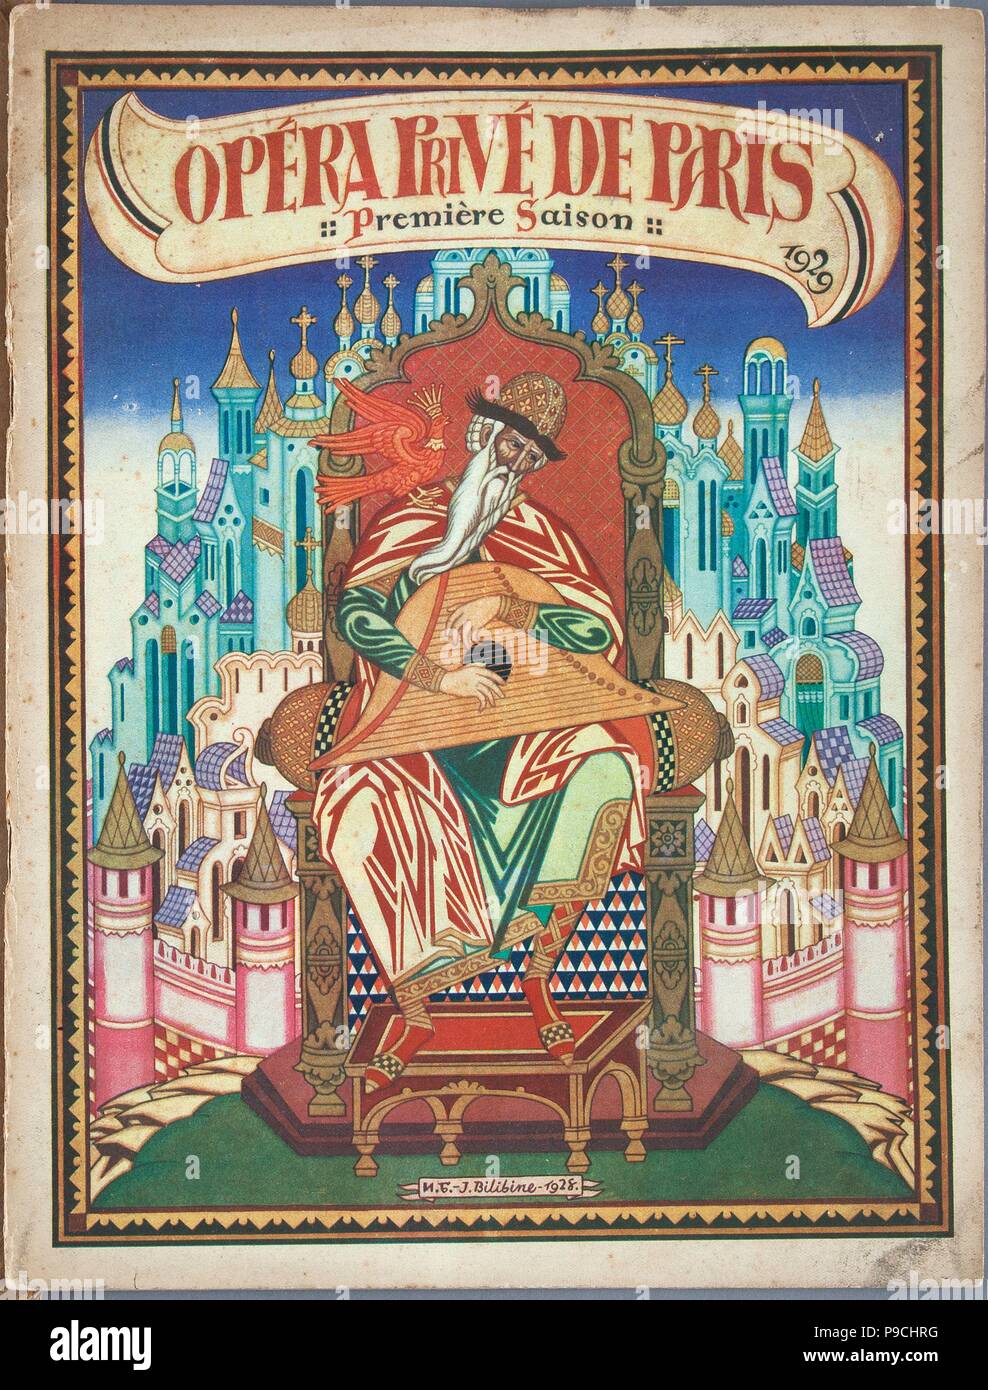 Title page of Souvenir program for the opera The Tale of Tsar Saltan by N. Rimsky-Korsakov. Museum: PRIVATE COLLECTION. Stock Photo